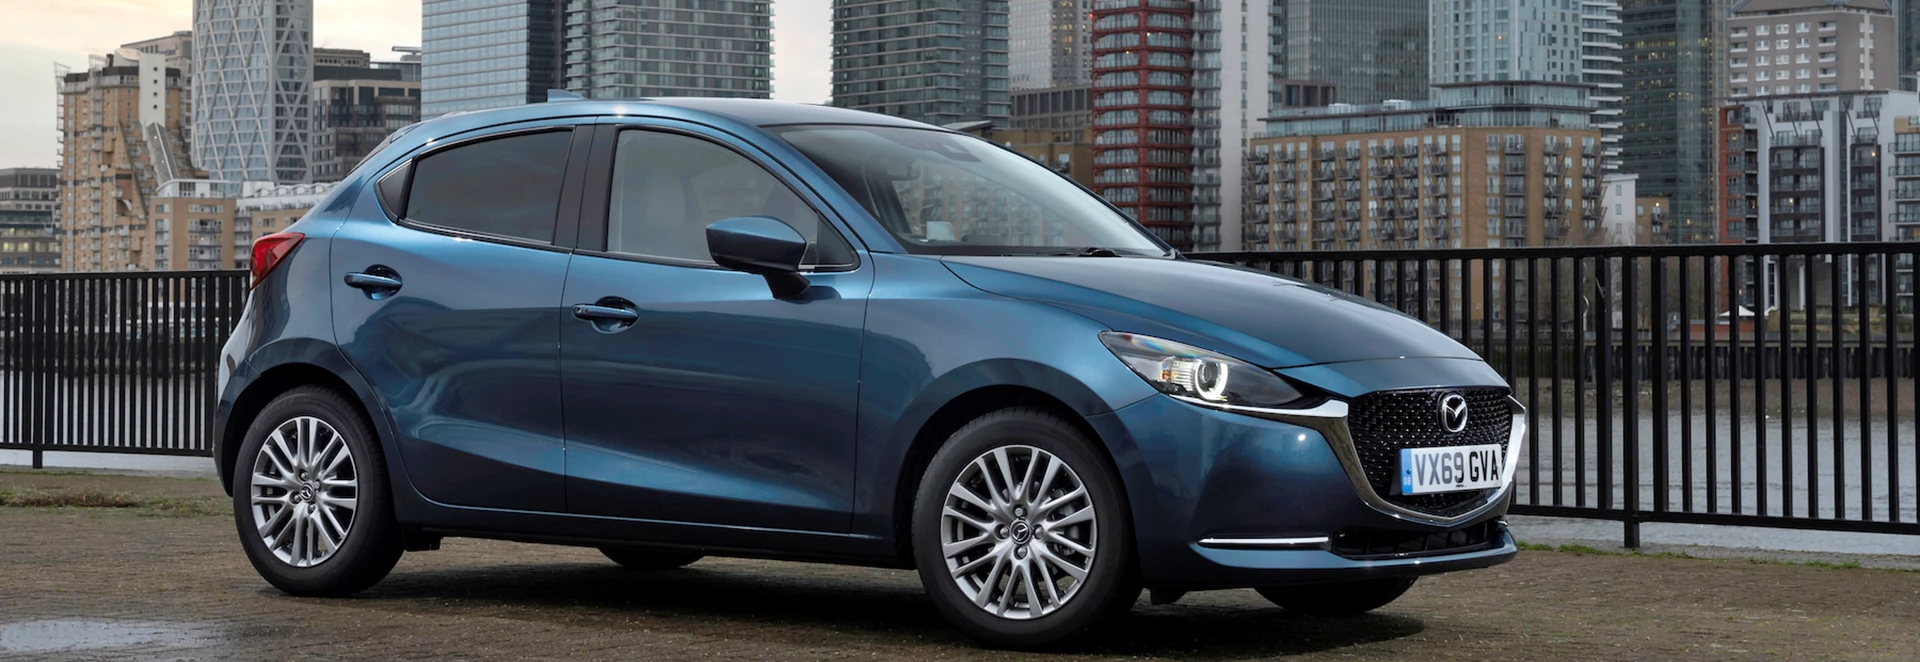 Prices and specs announced for updated 2020 Mazda 2